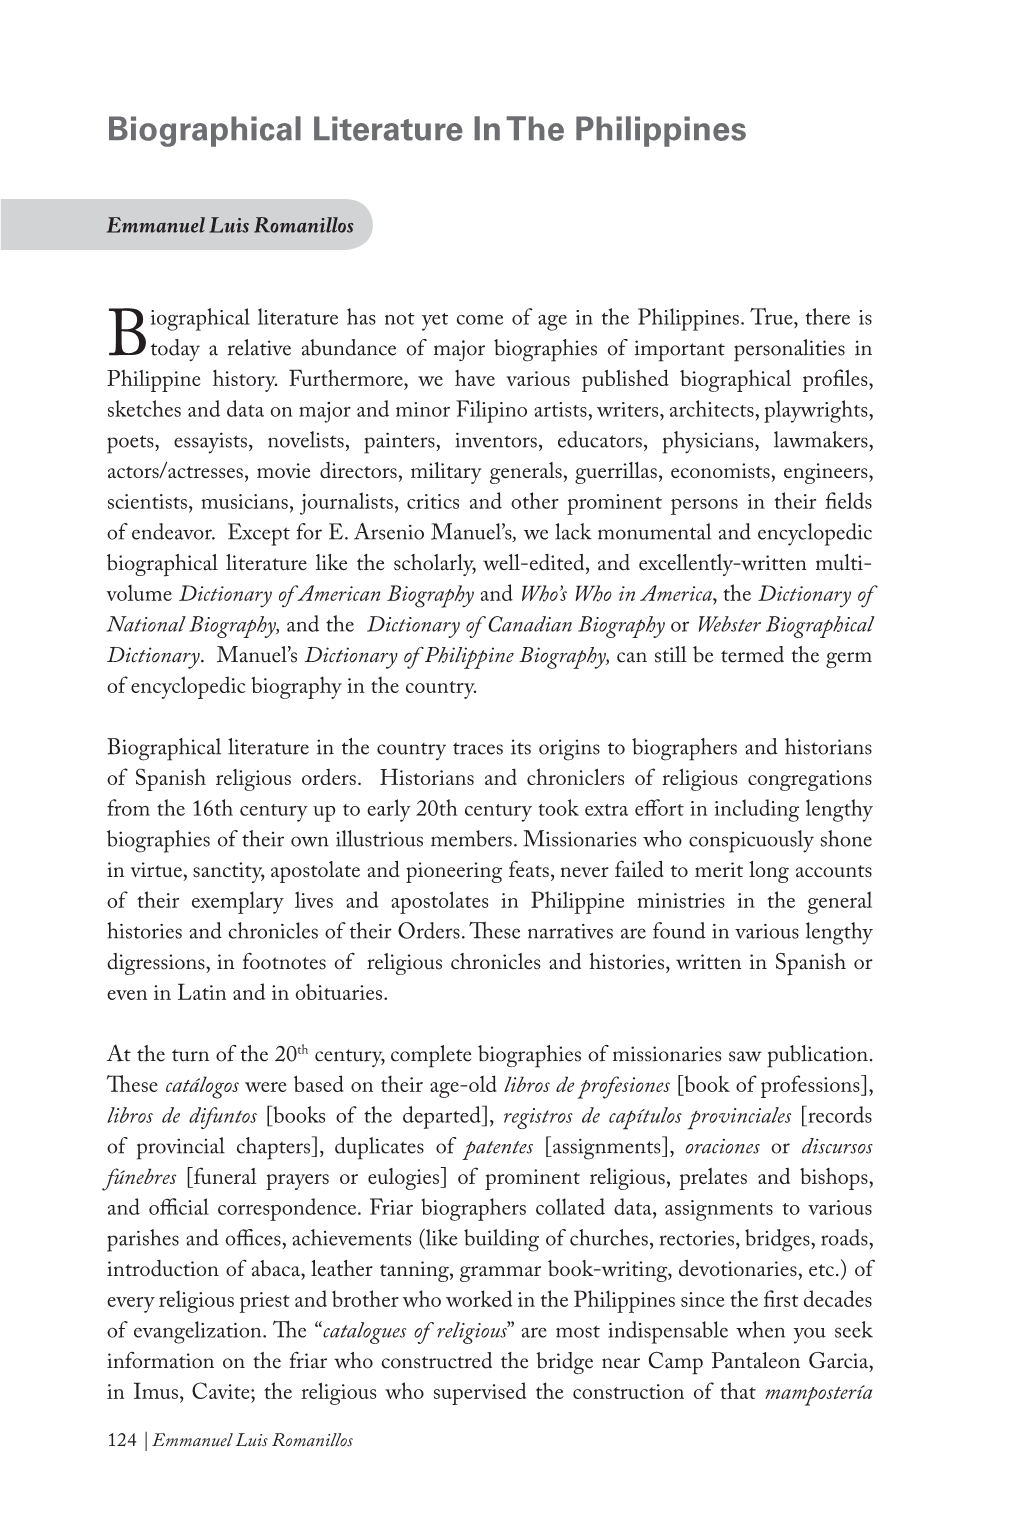 Biographical Literature in the Philippines